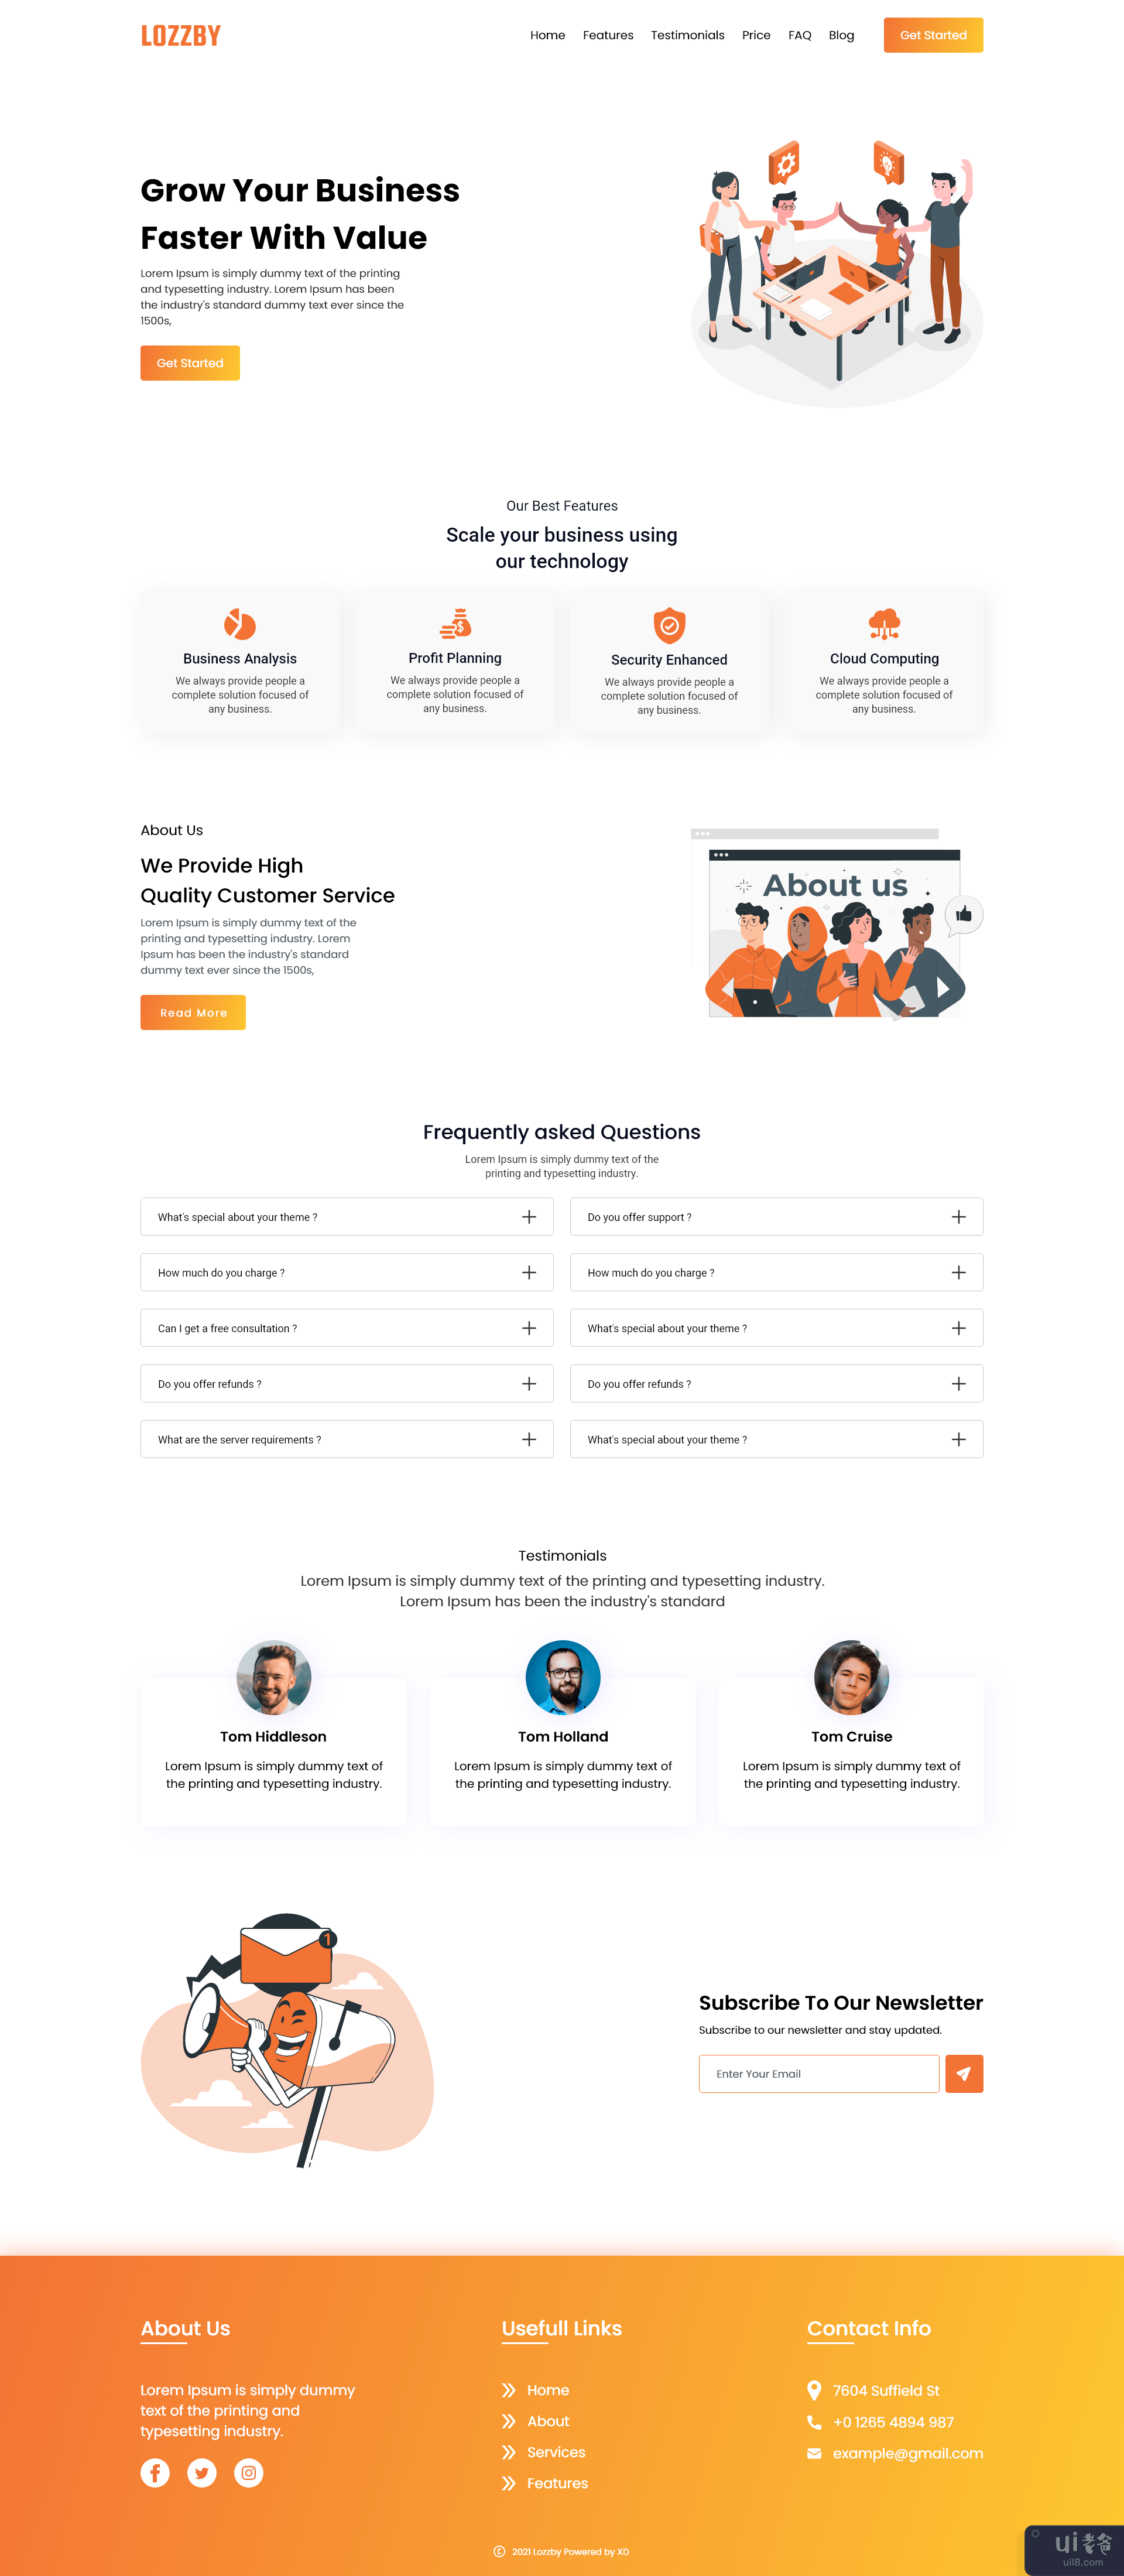 Lozzby登陆页面(Lozzby Landing Page)插图